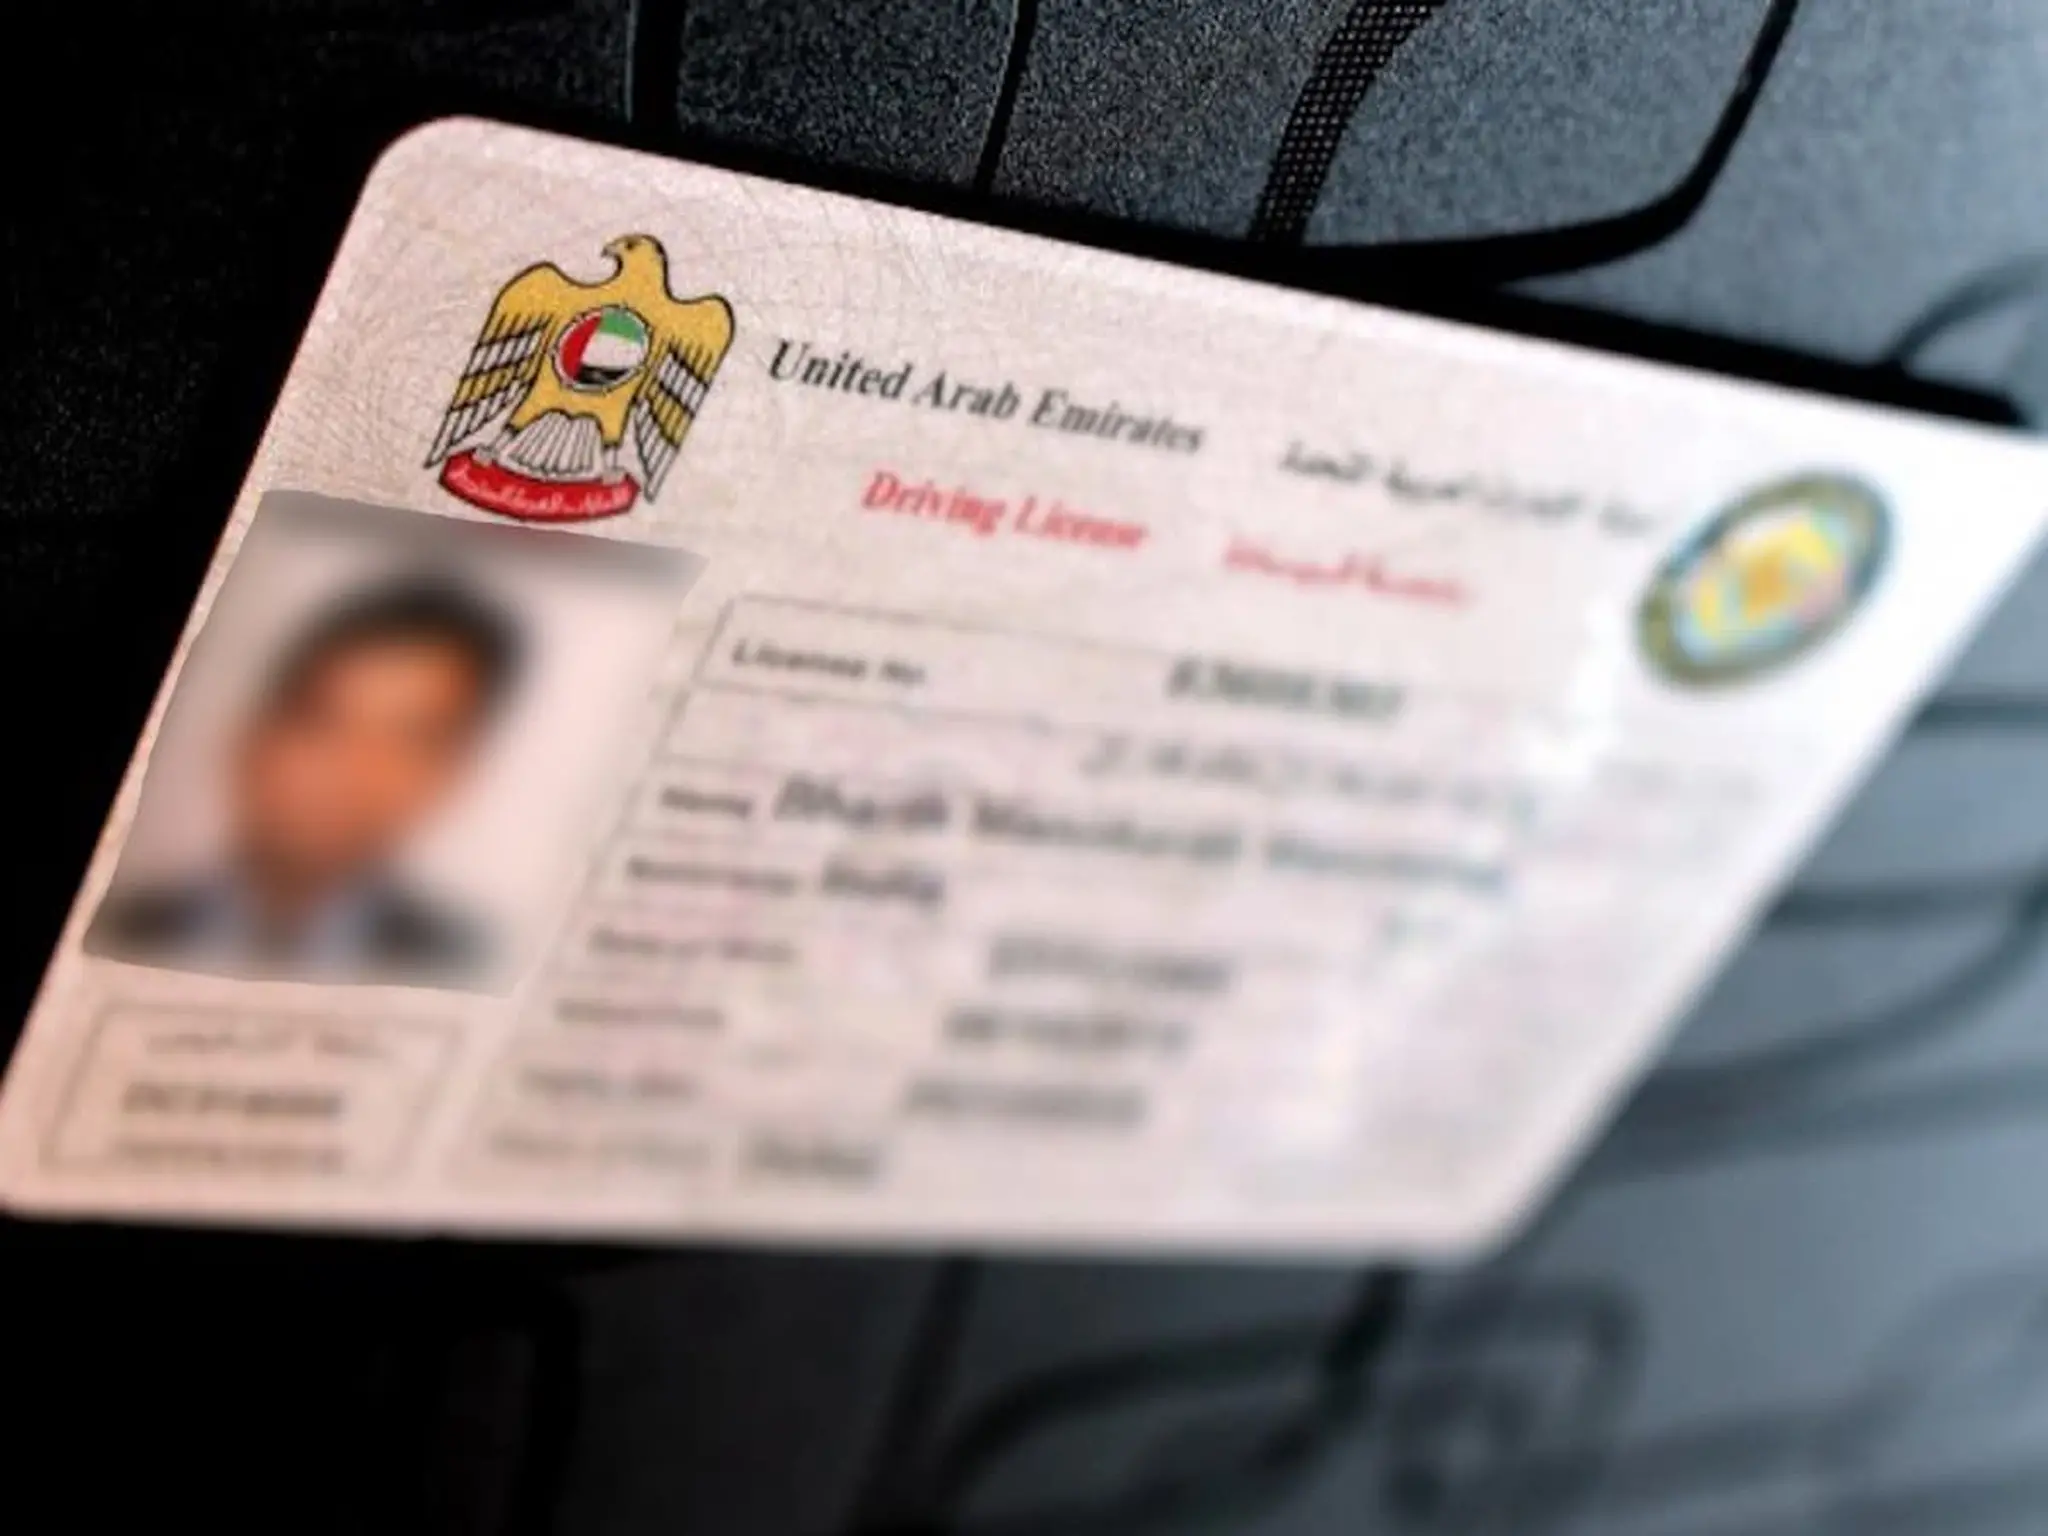 UAE driver's licence: Sharjah Police launches "One-Day Test" initiative 